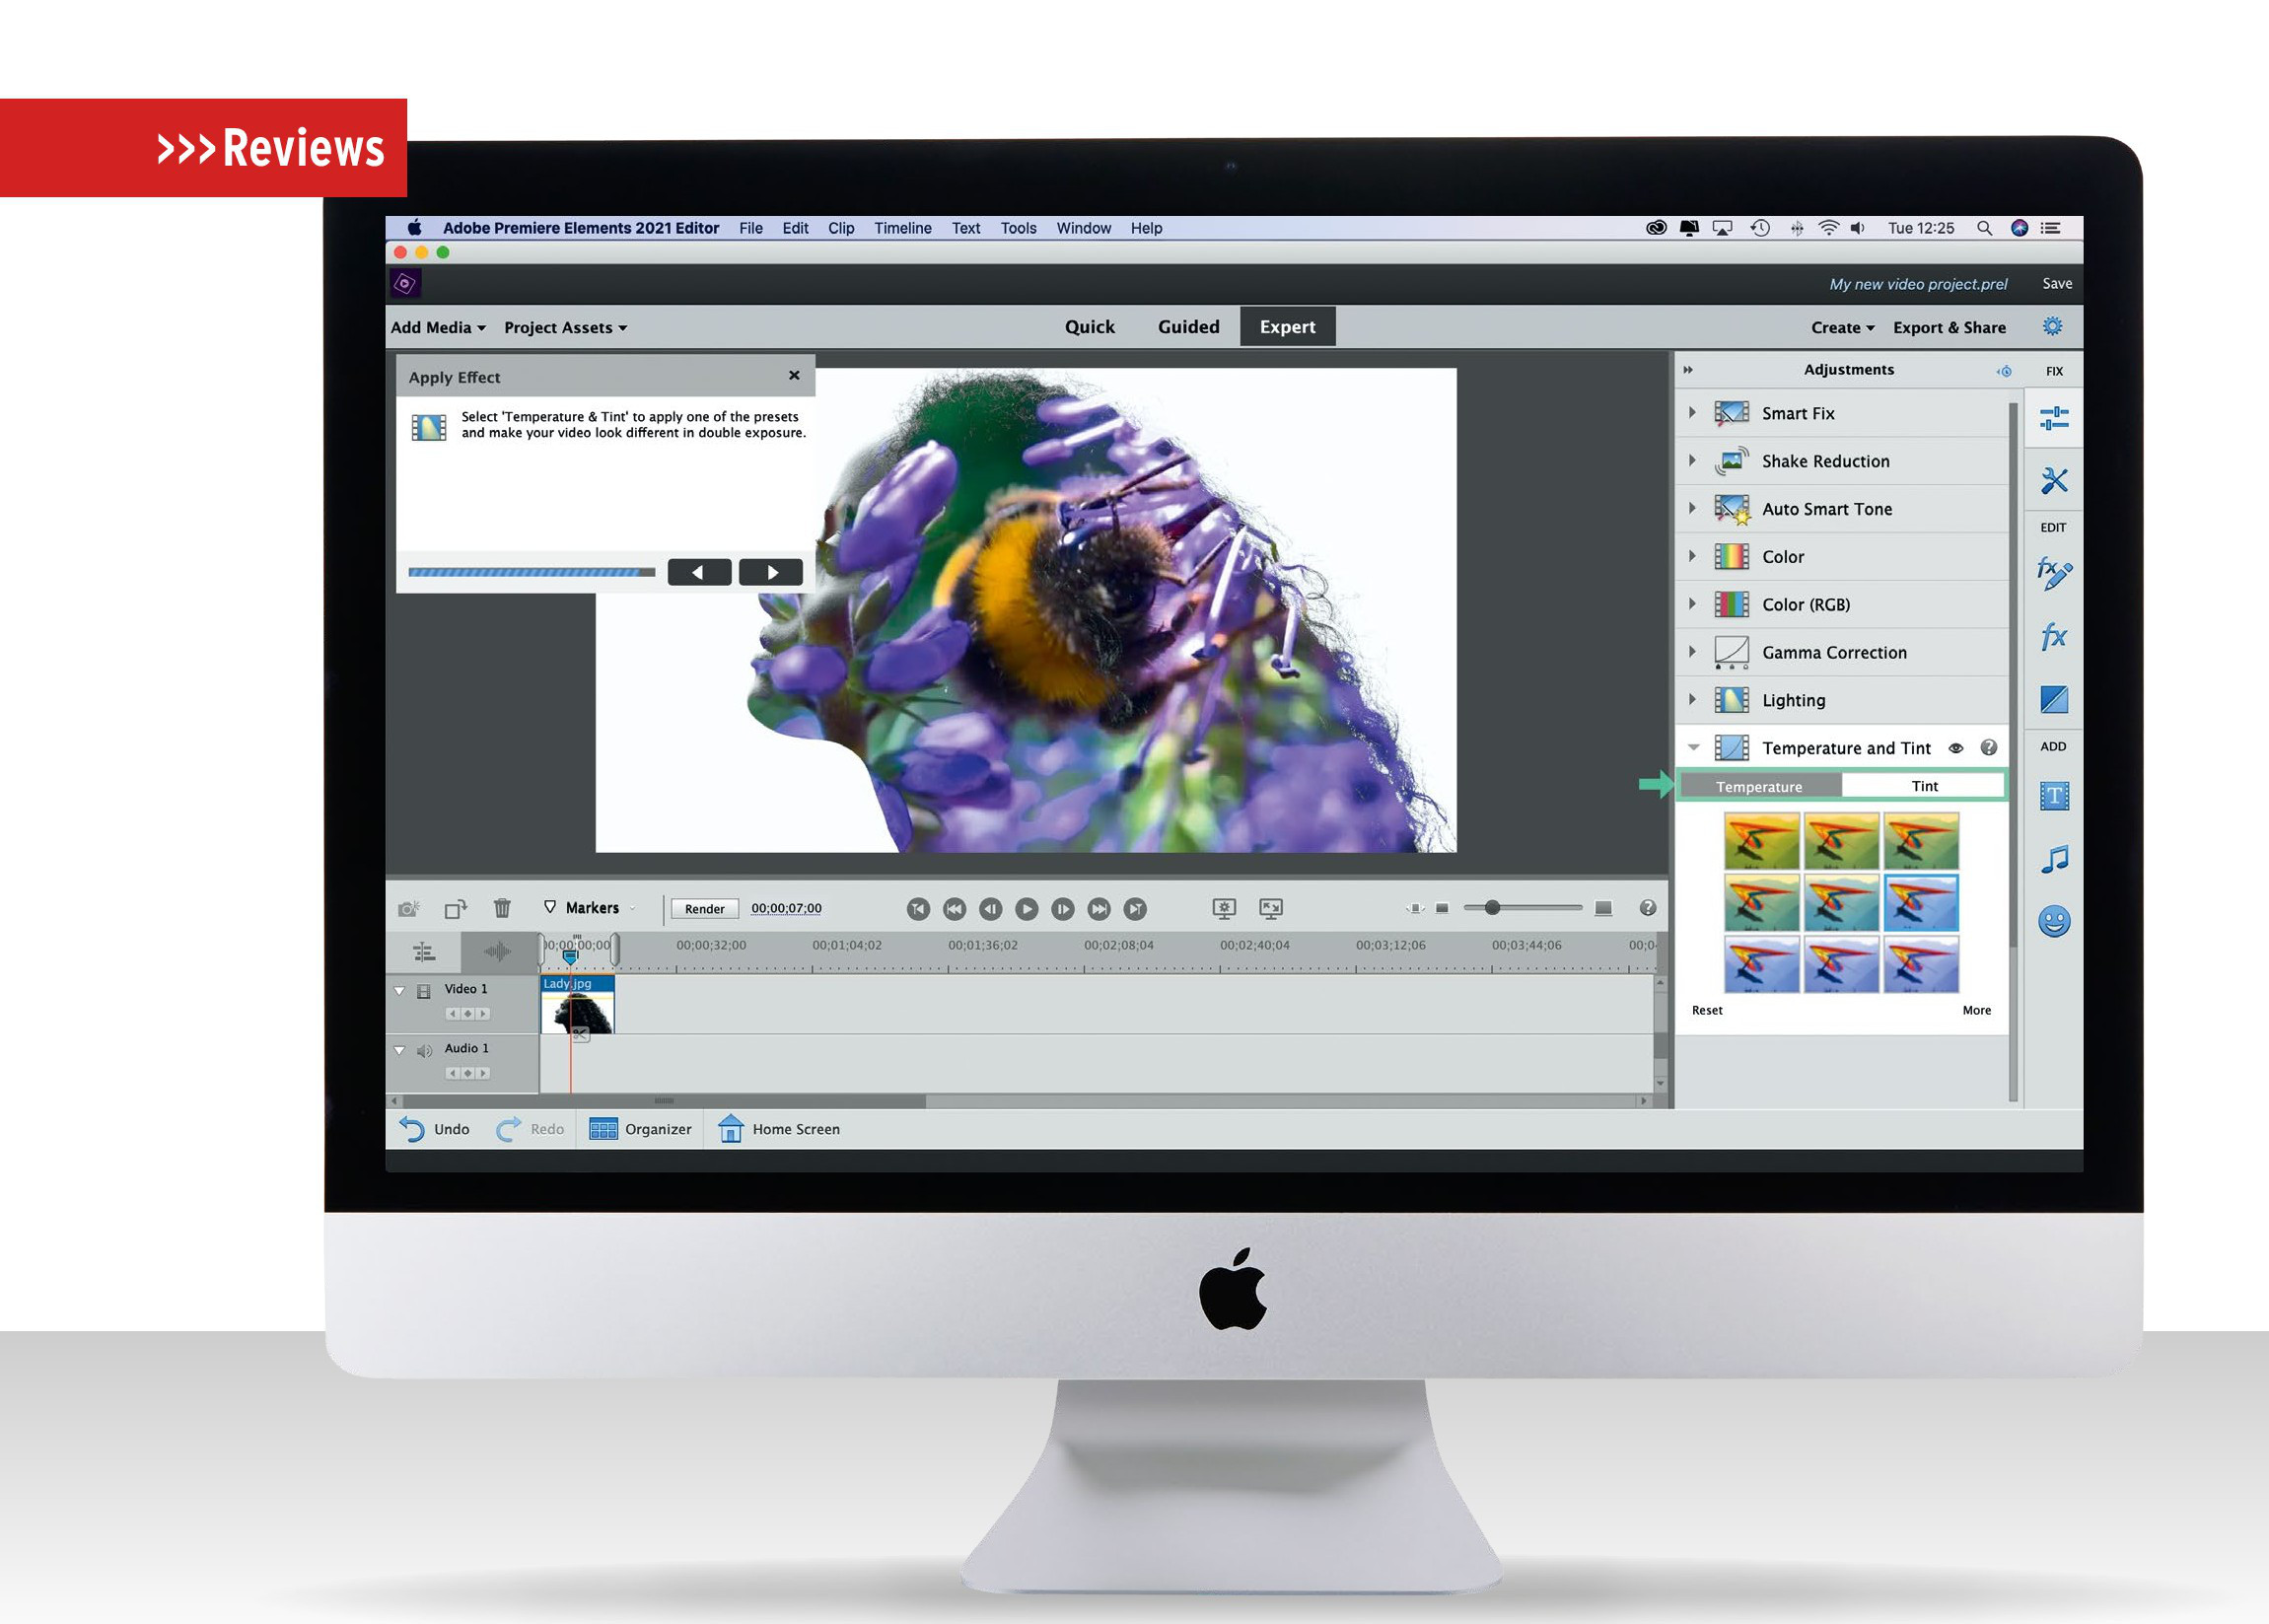 adobe premiere elements 13 for mac and windows